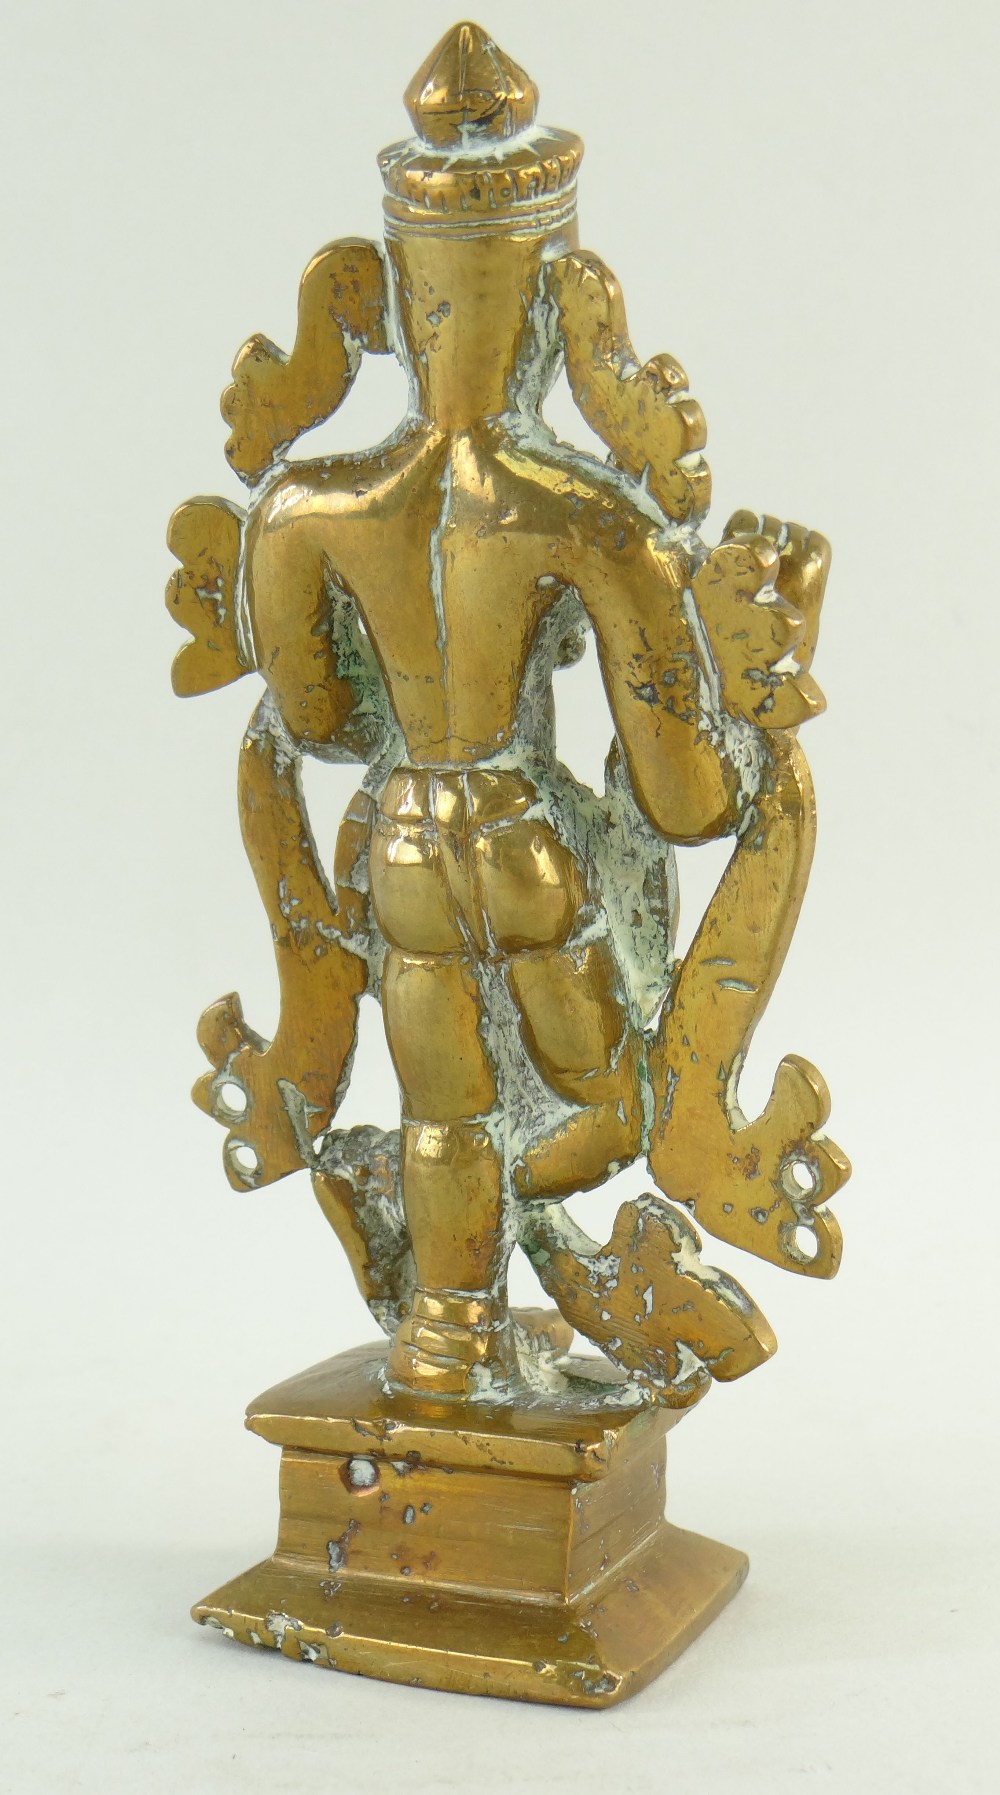 BRONZE FIGURE OF KRISHNA PLAYING THE FLUTE on stepped plinth base, 15cms high Condition: flute - Image 2 of 2